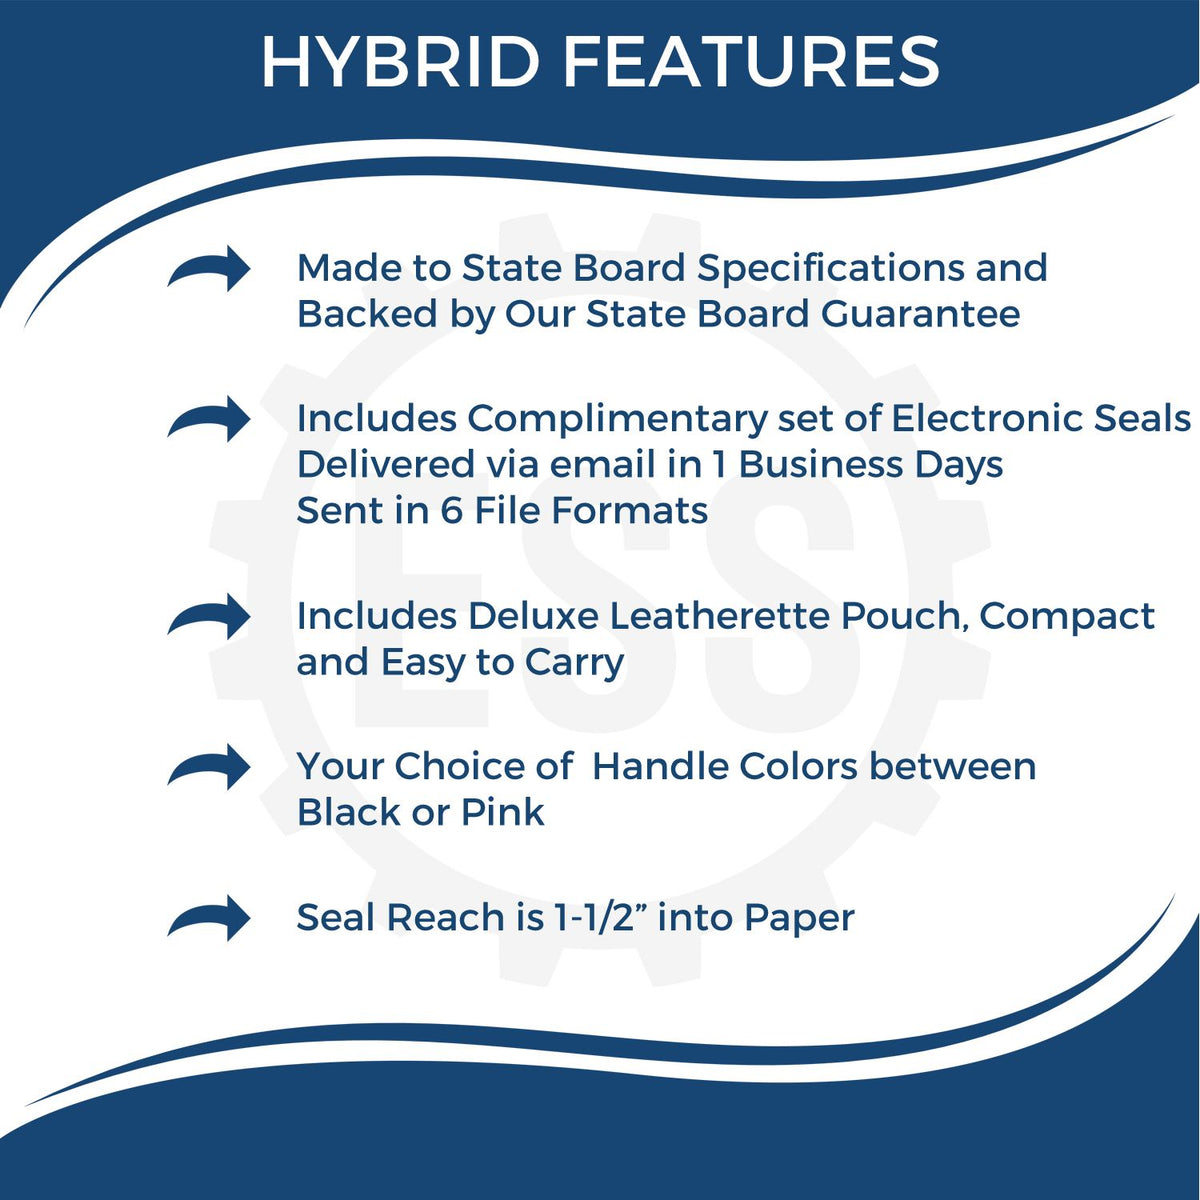 A picture of an infographic highlighting the selling points for the Hybrid Delaware Architect Seal